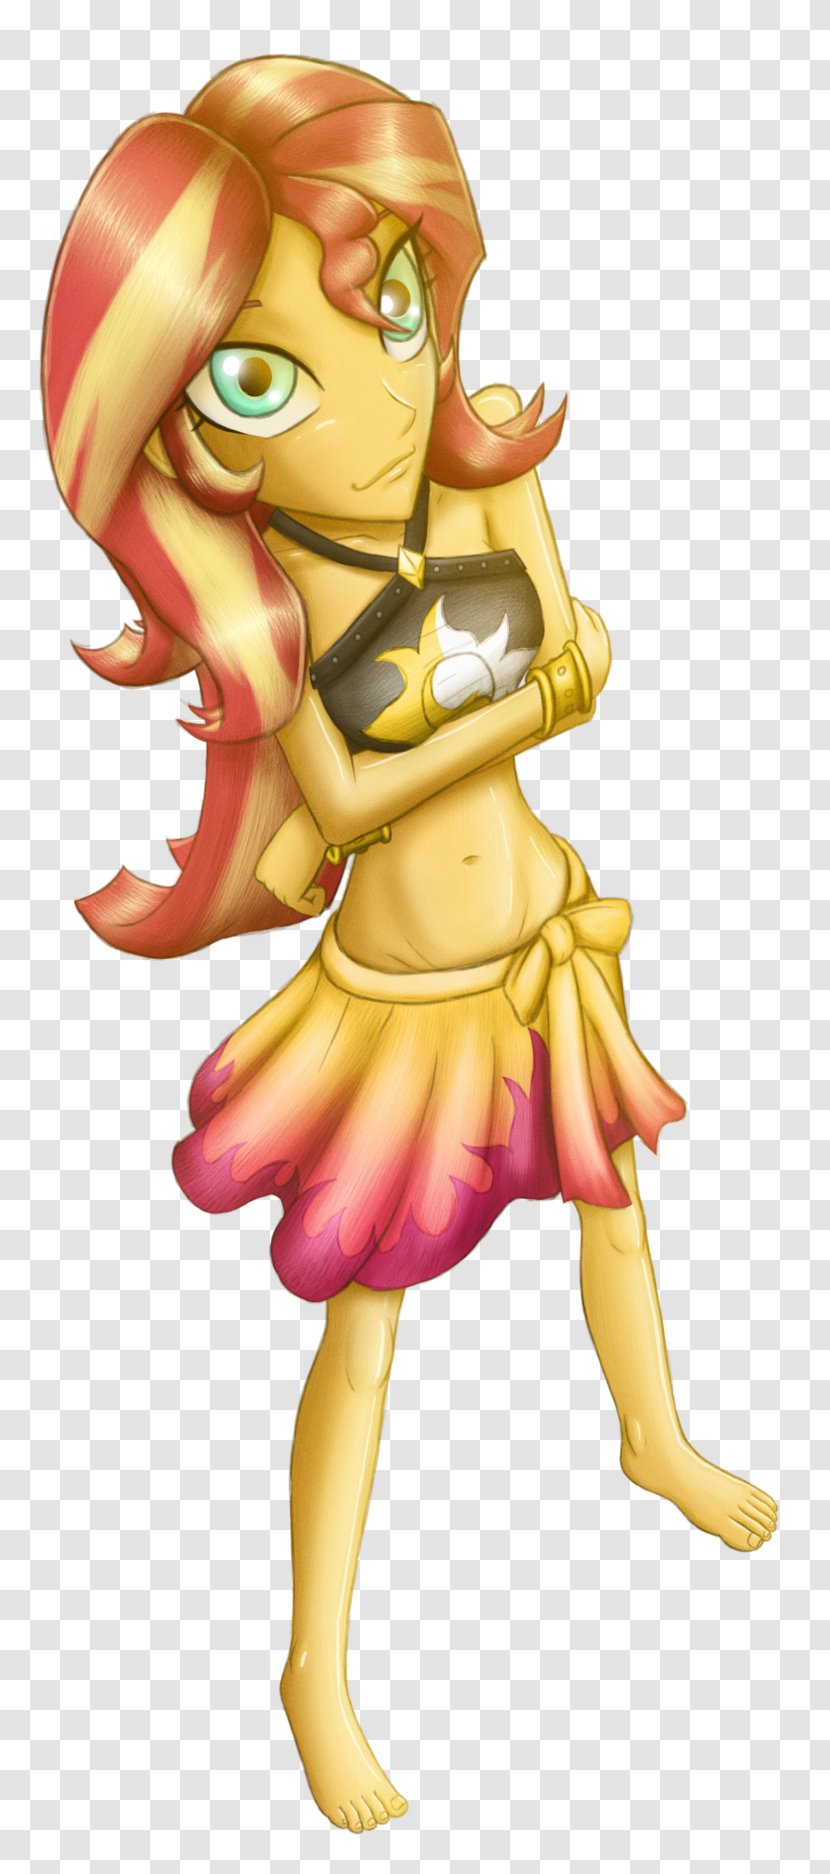 Sunset Shimmer Fluttershy My Little Pony: Equestria Girls Cycles Render - Cartoon Transparent PNG